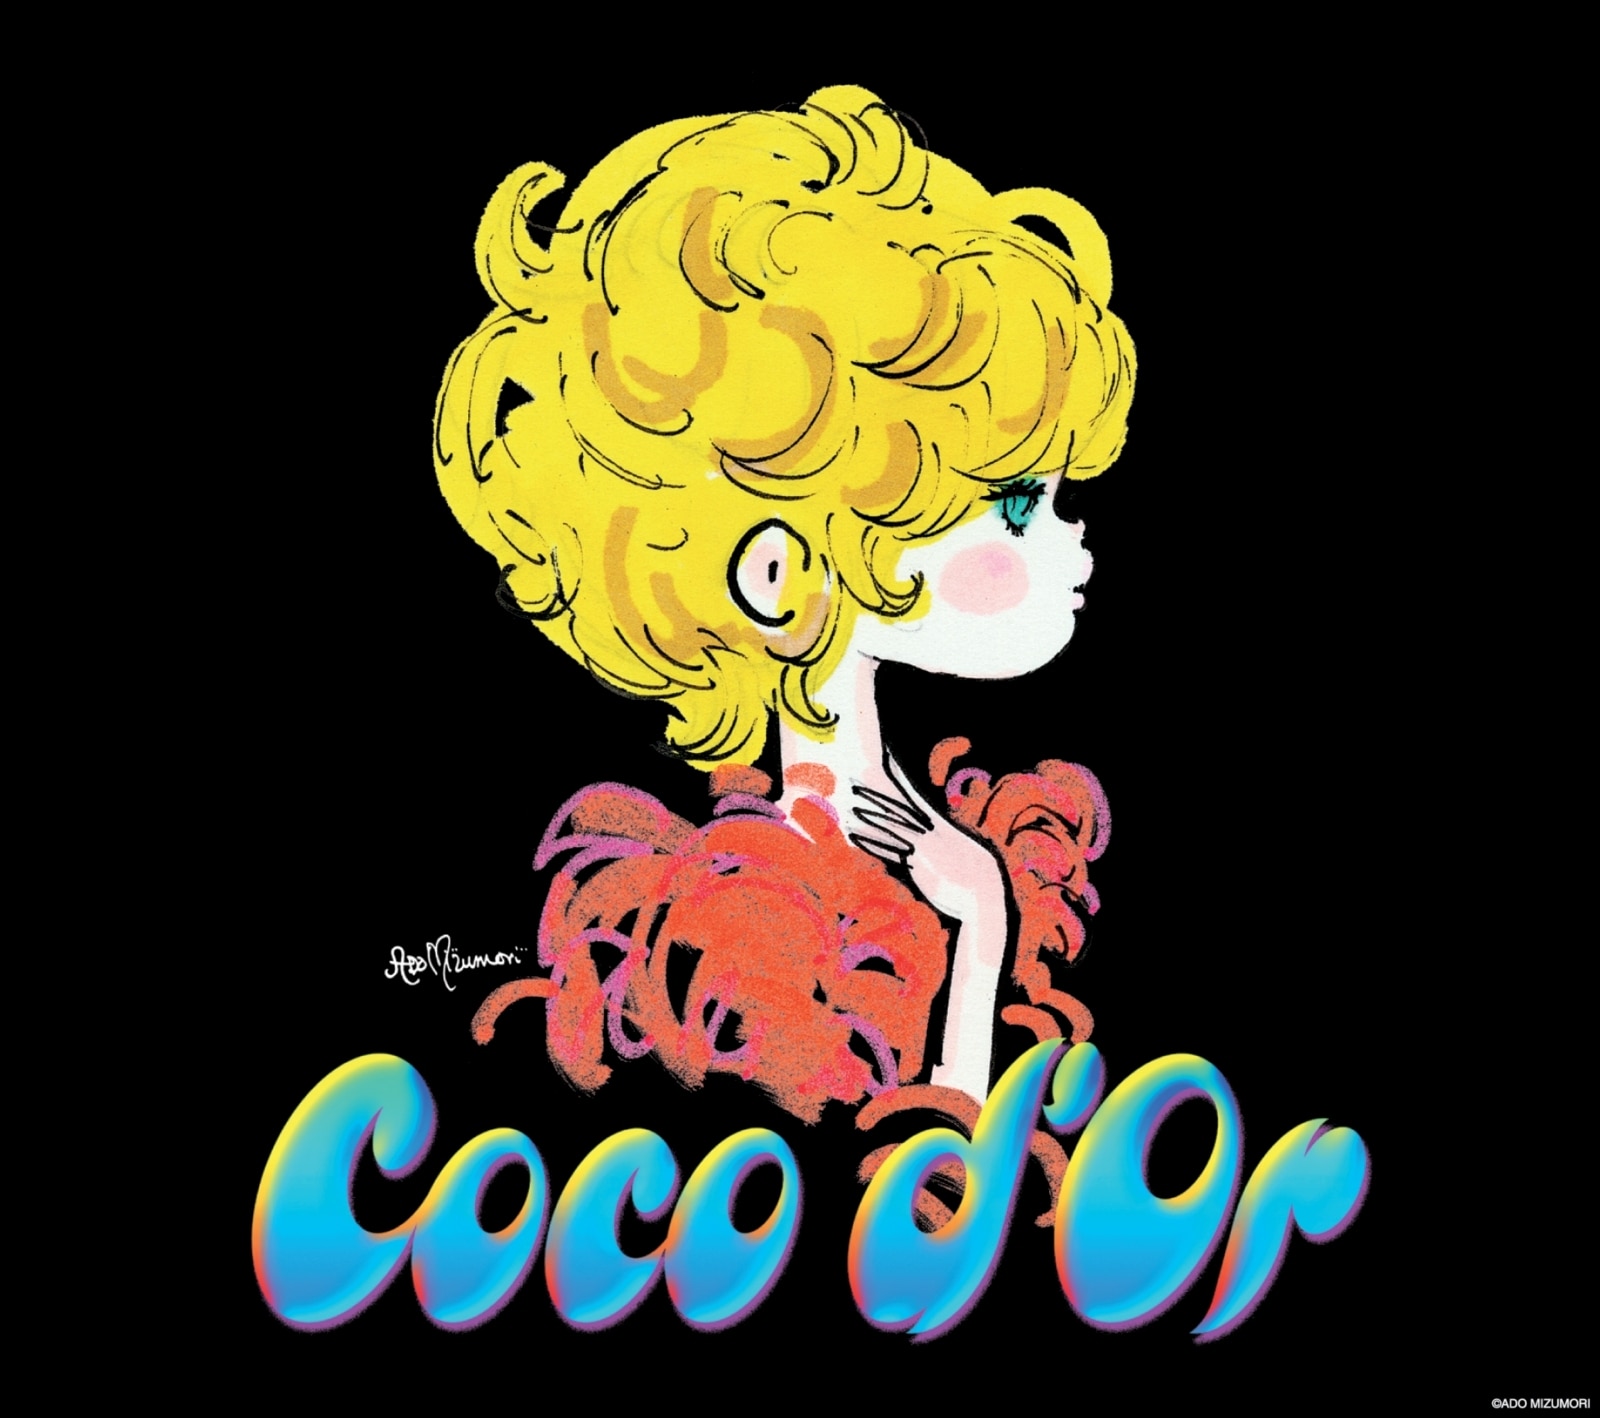 Coco d'Or